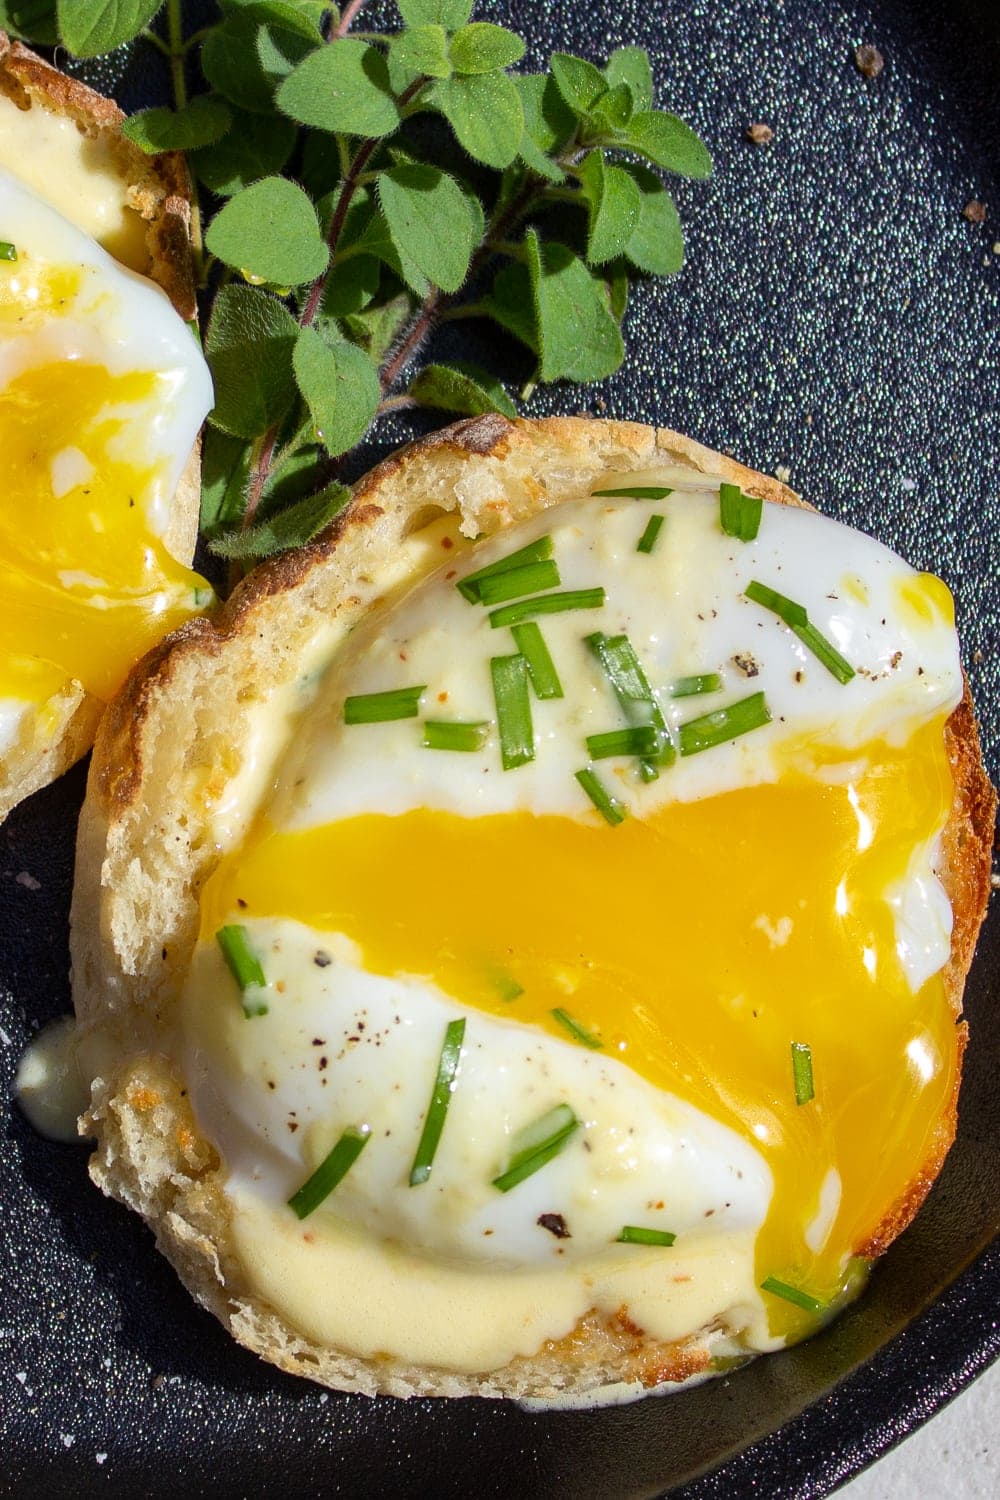 sous vide poached egg cut open over English muffin p1